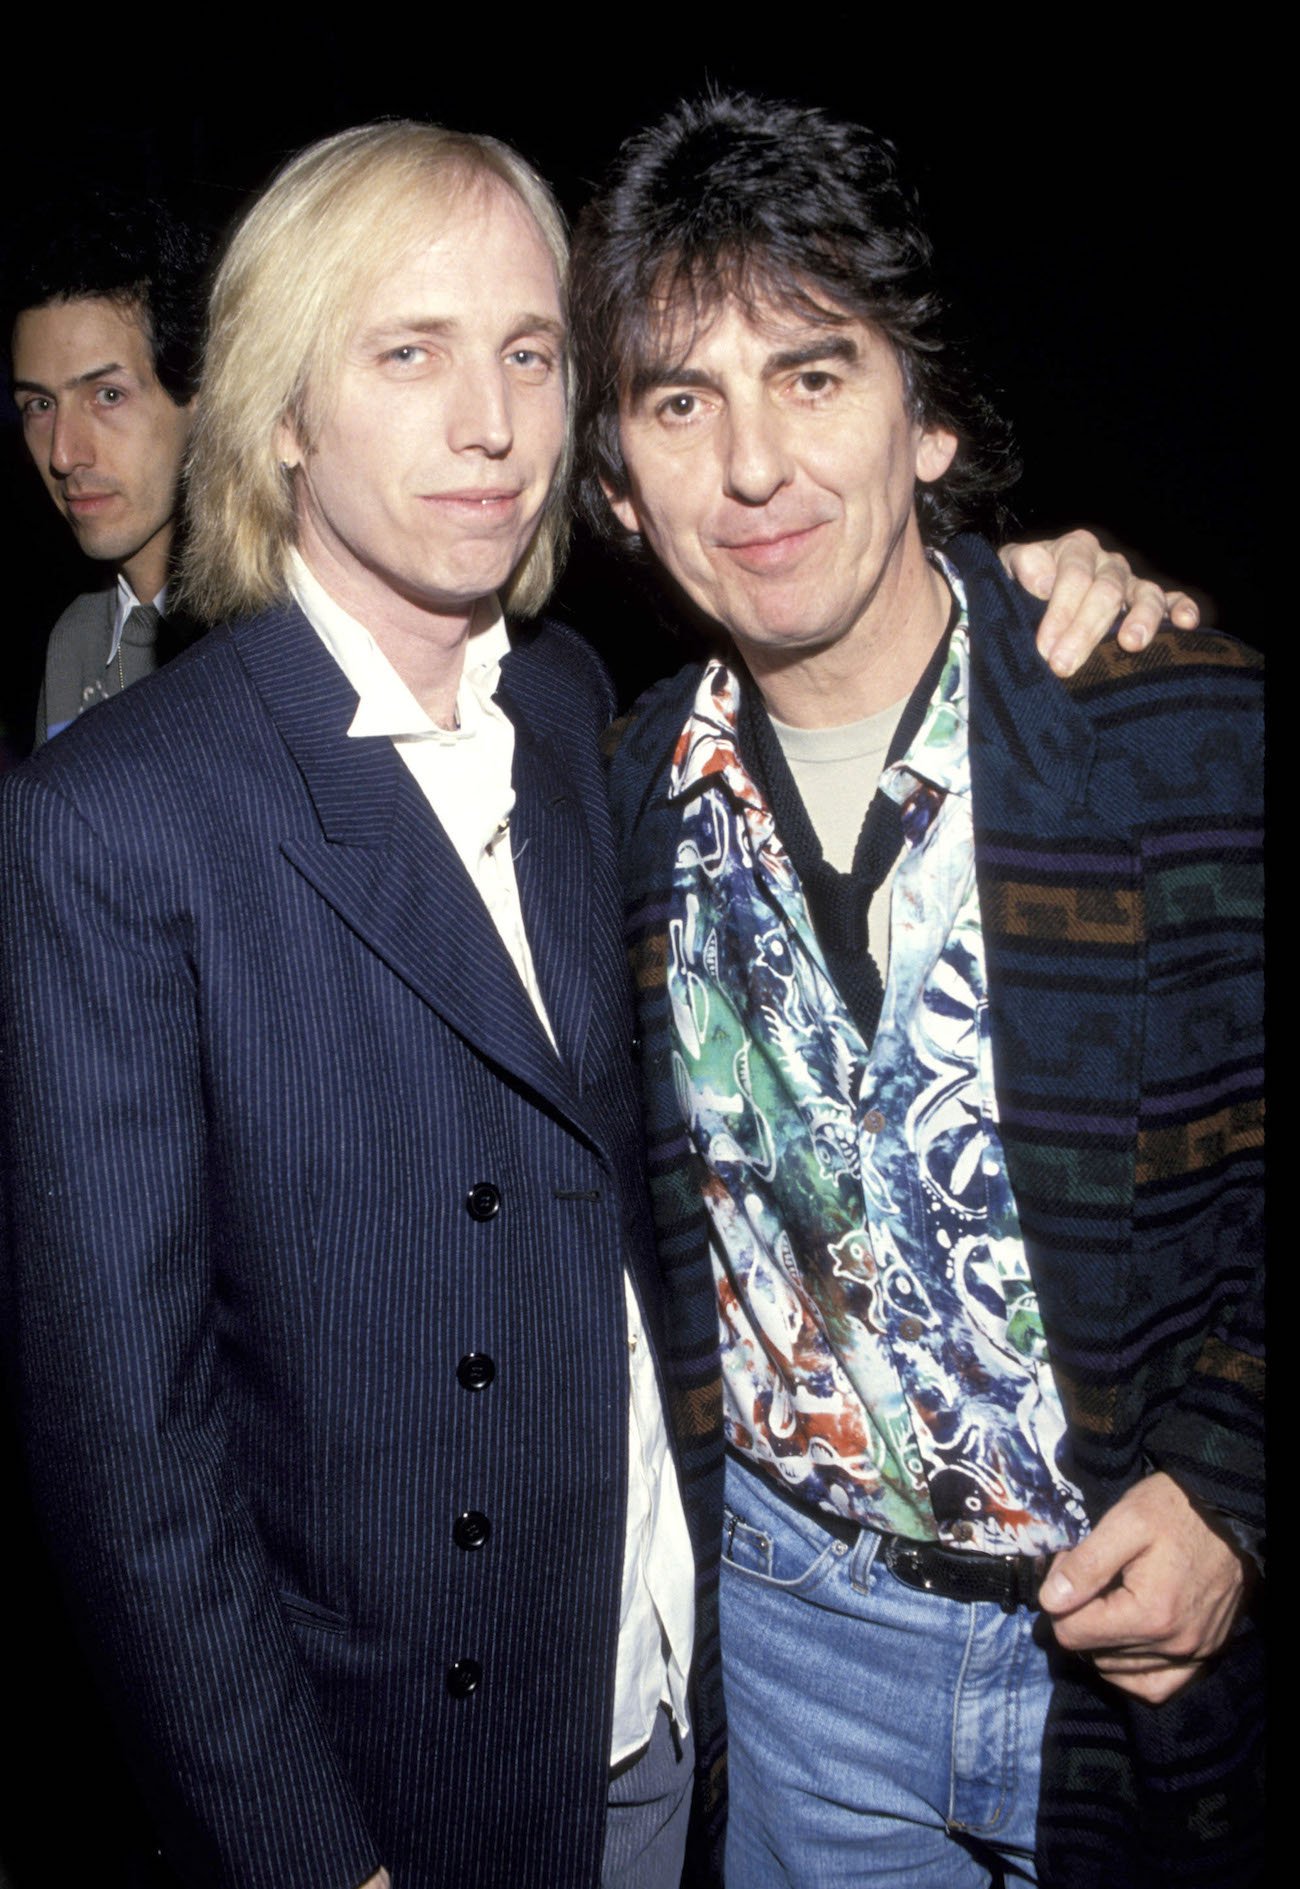 Tom Petty and George Harrison embracing at the 2000 Billboard Music Awards. 